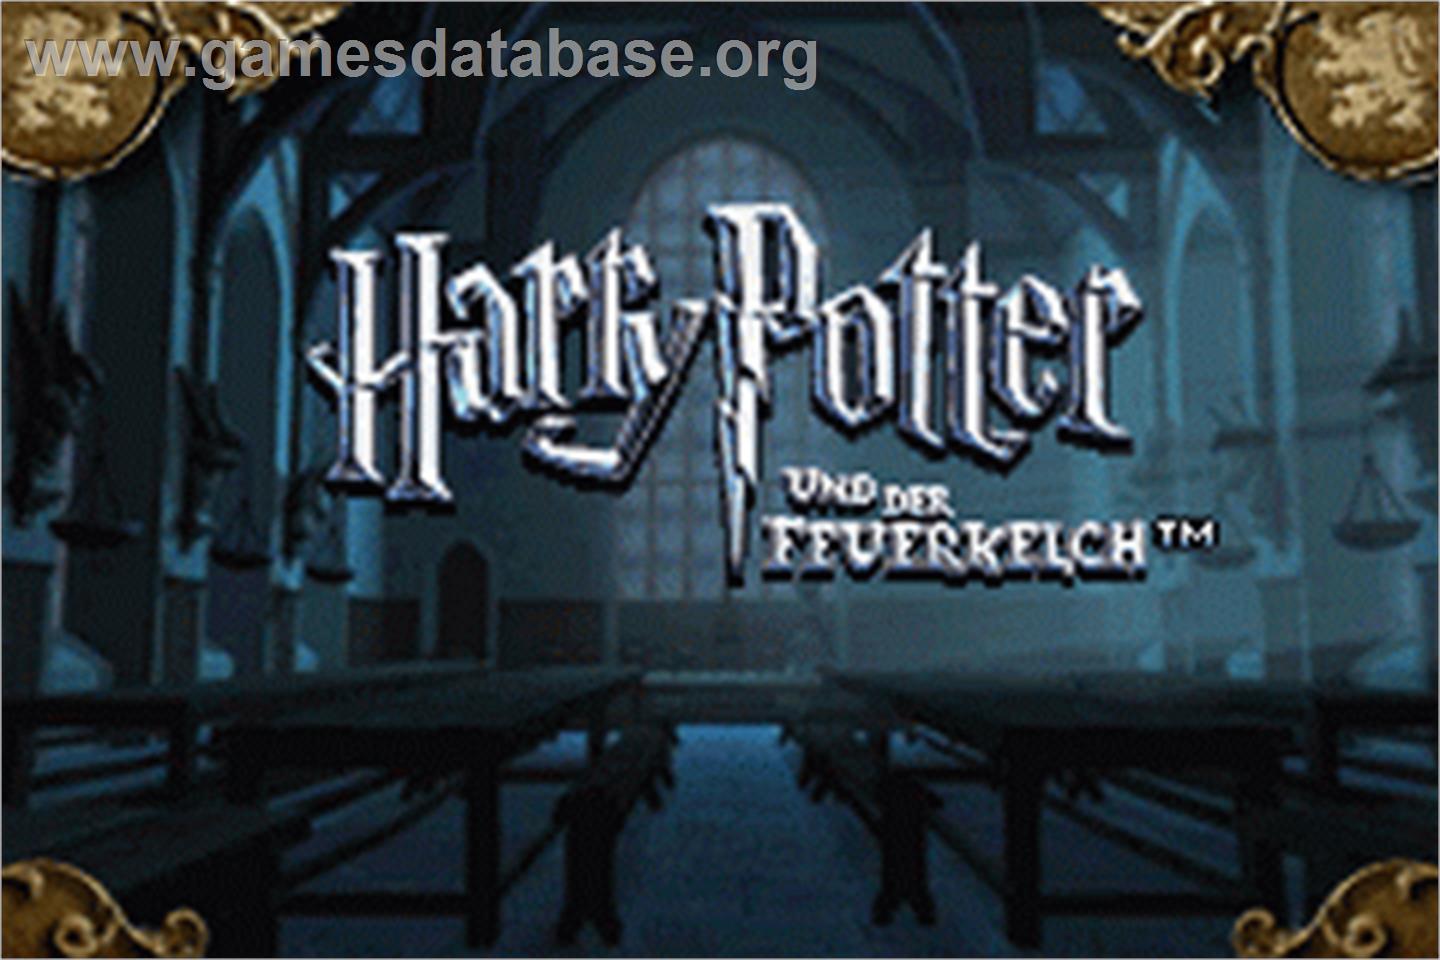 Harry Potter and the Goblet of Fire - Nintendo Game Boy Advance - Artwork - Title Screen